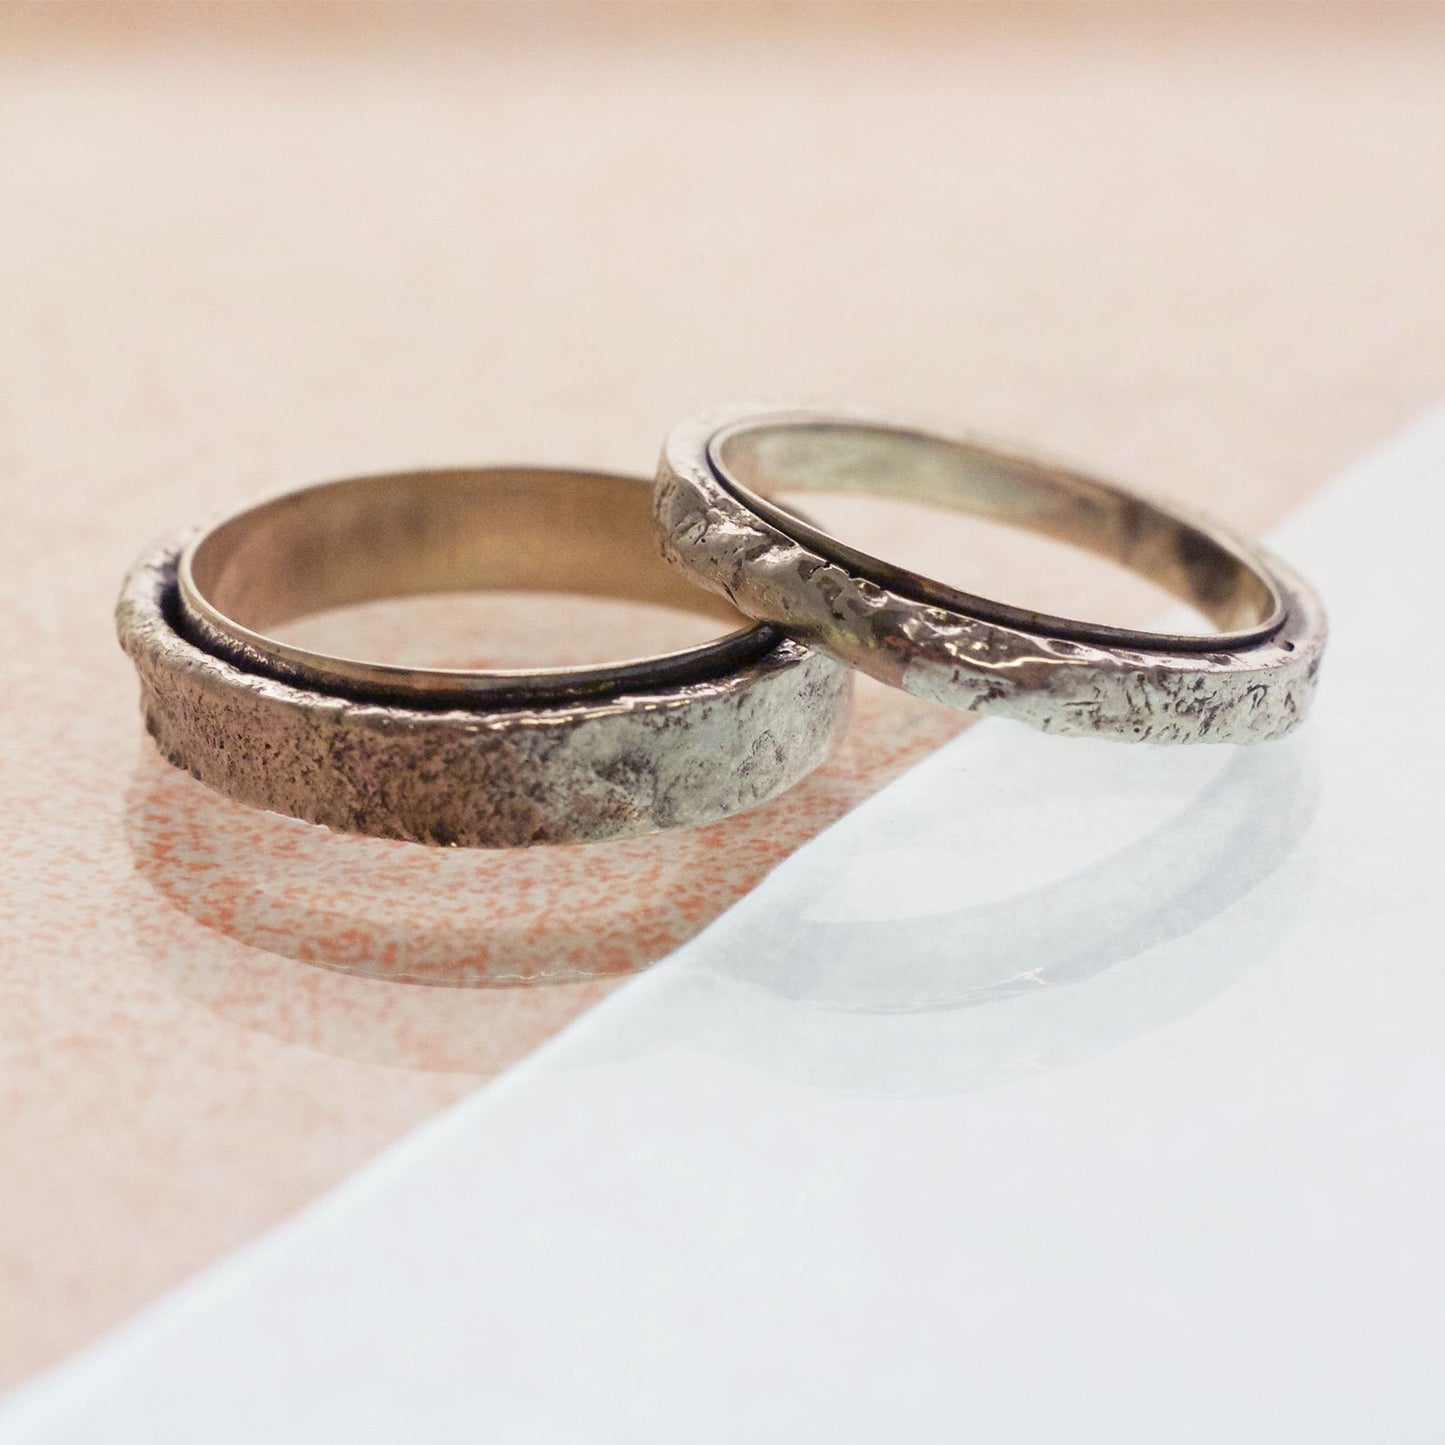 Two beautiful and unusual wedding bands, with rough, raw, organic texture. Made in oxidised recycled silver. 